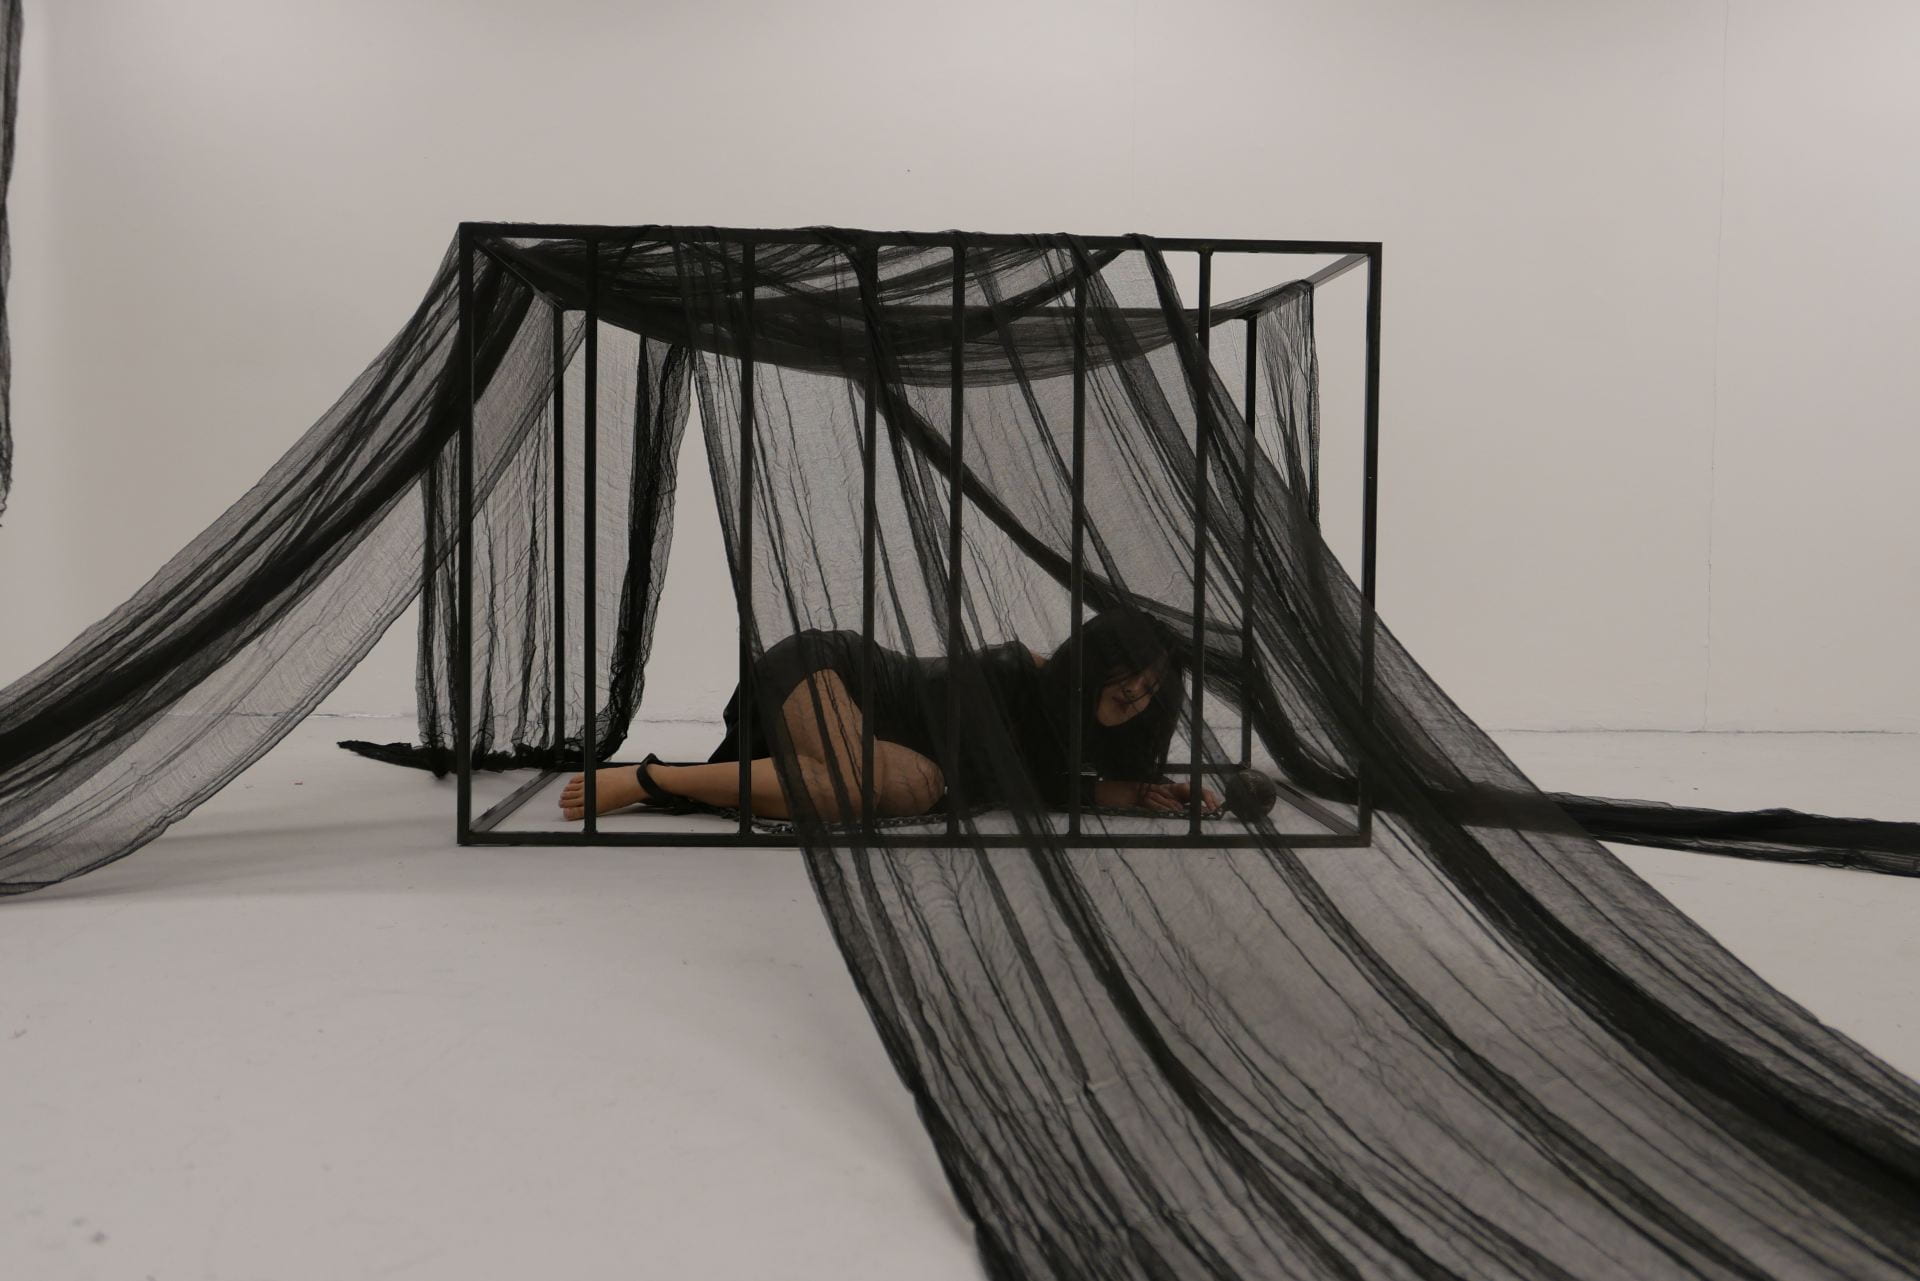 An image of a person dressed in black in a cage in a white room.